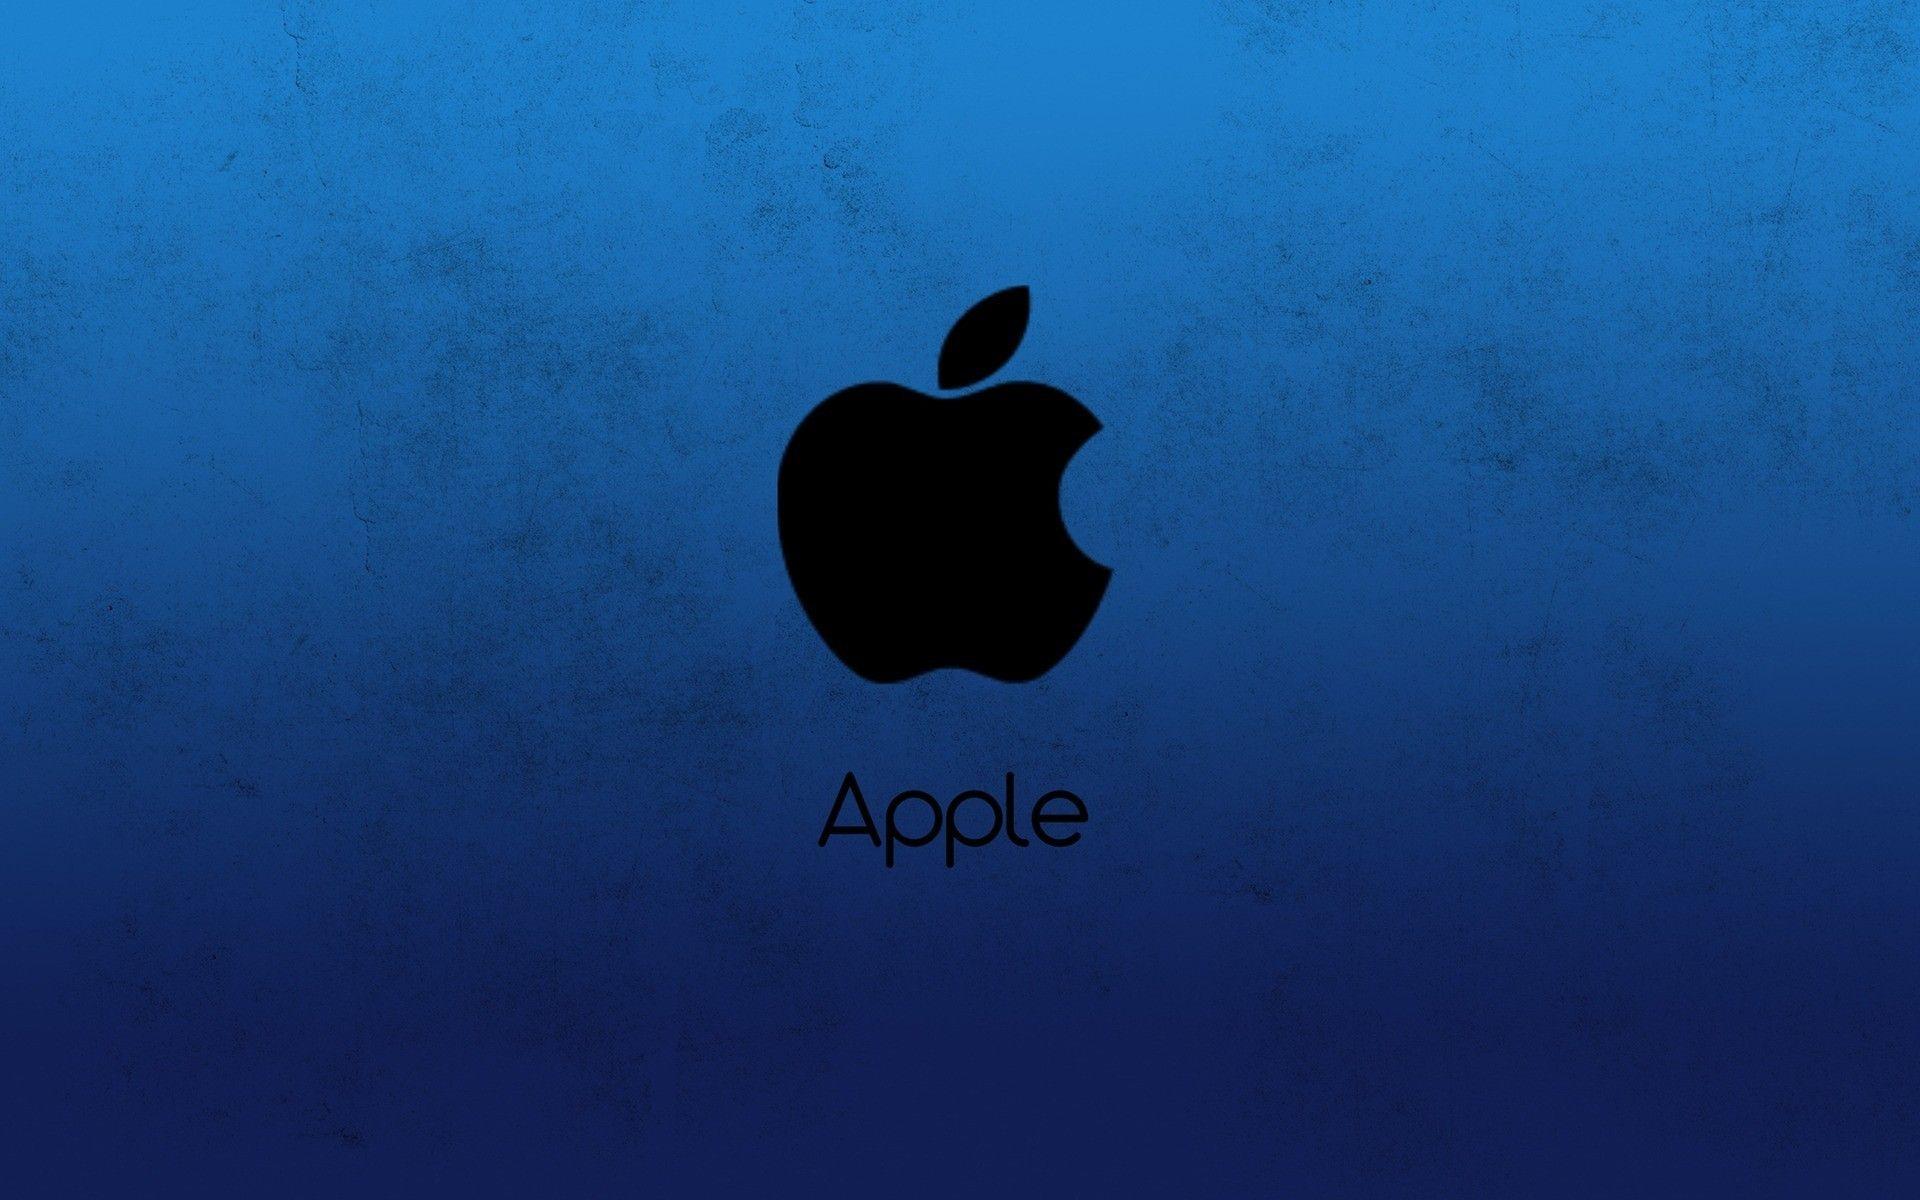 Blueand White Apple Logo - 79+ Apple Blue Wallpapers on WallpaperPlay